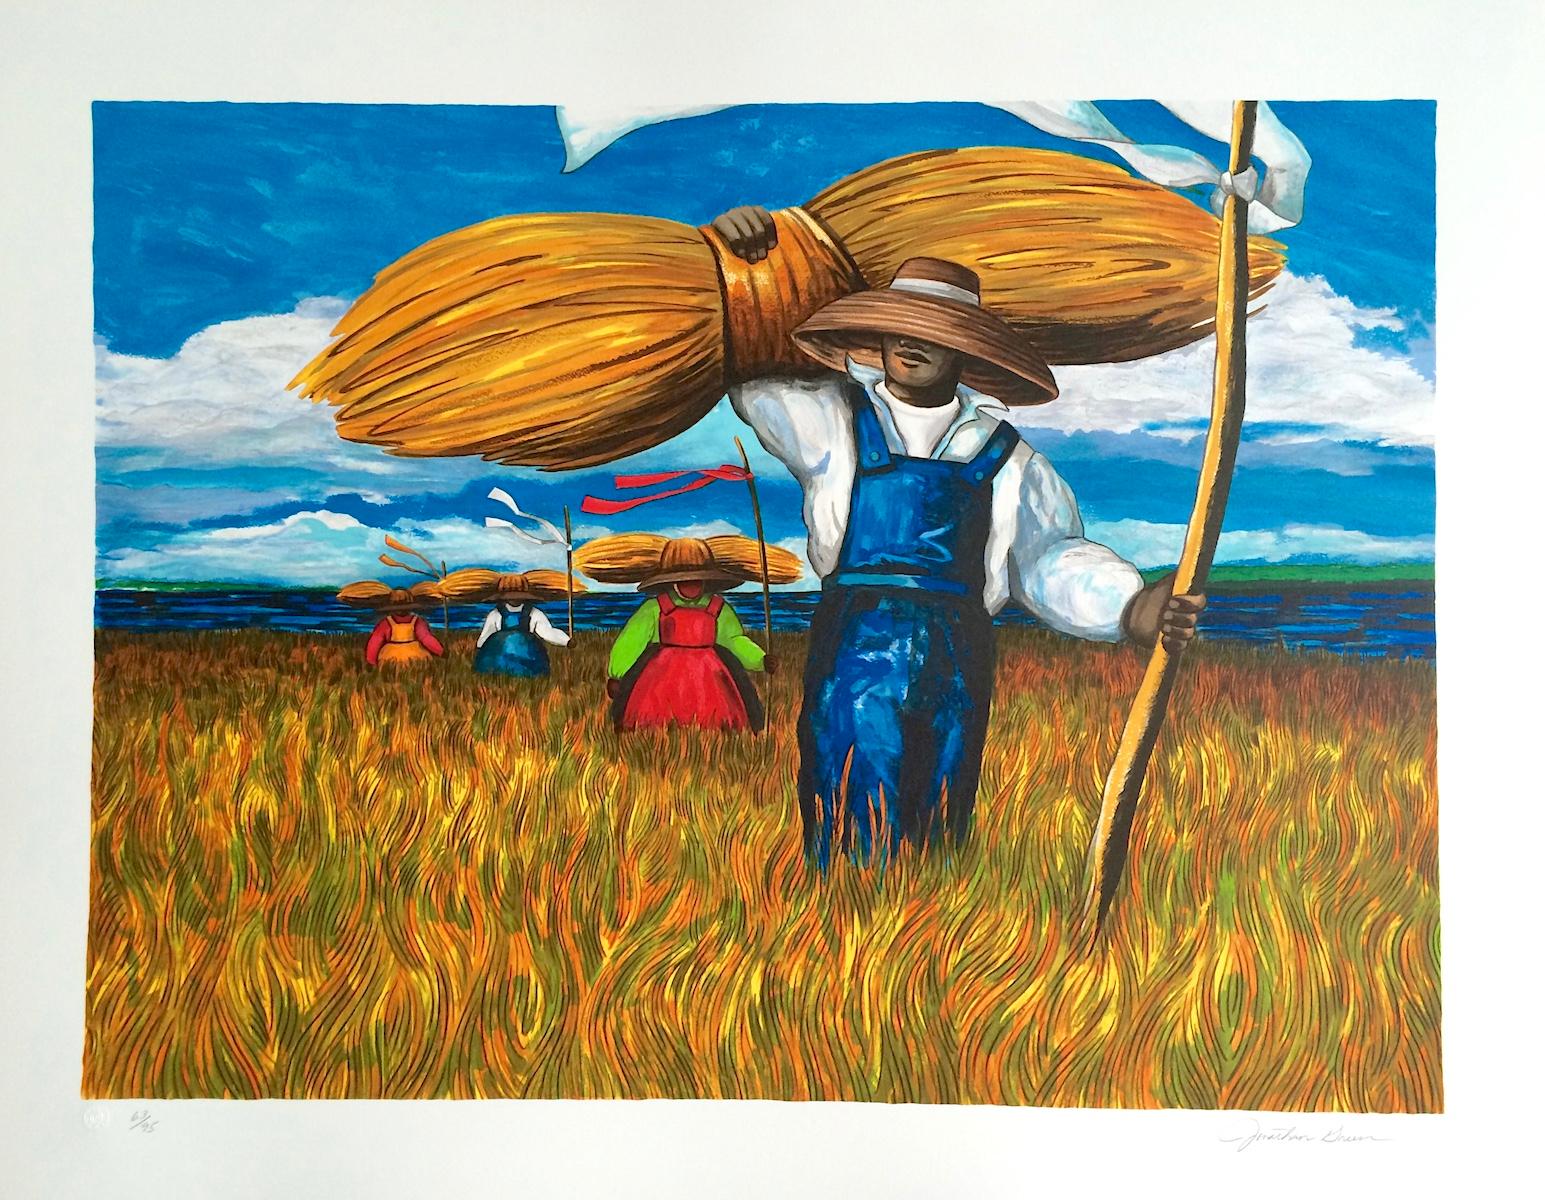 SWEETGRASS CARRIERS, Signed Lithograph, African American, Gullah Culture - Print by Jonathan Green